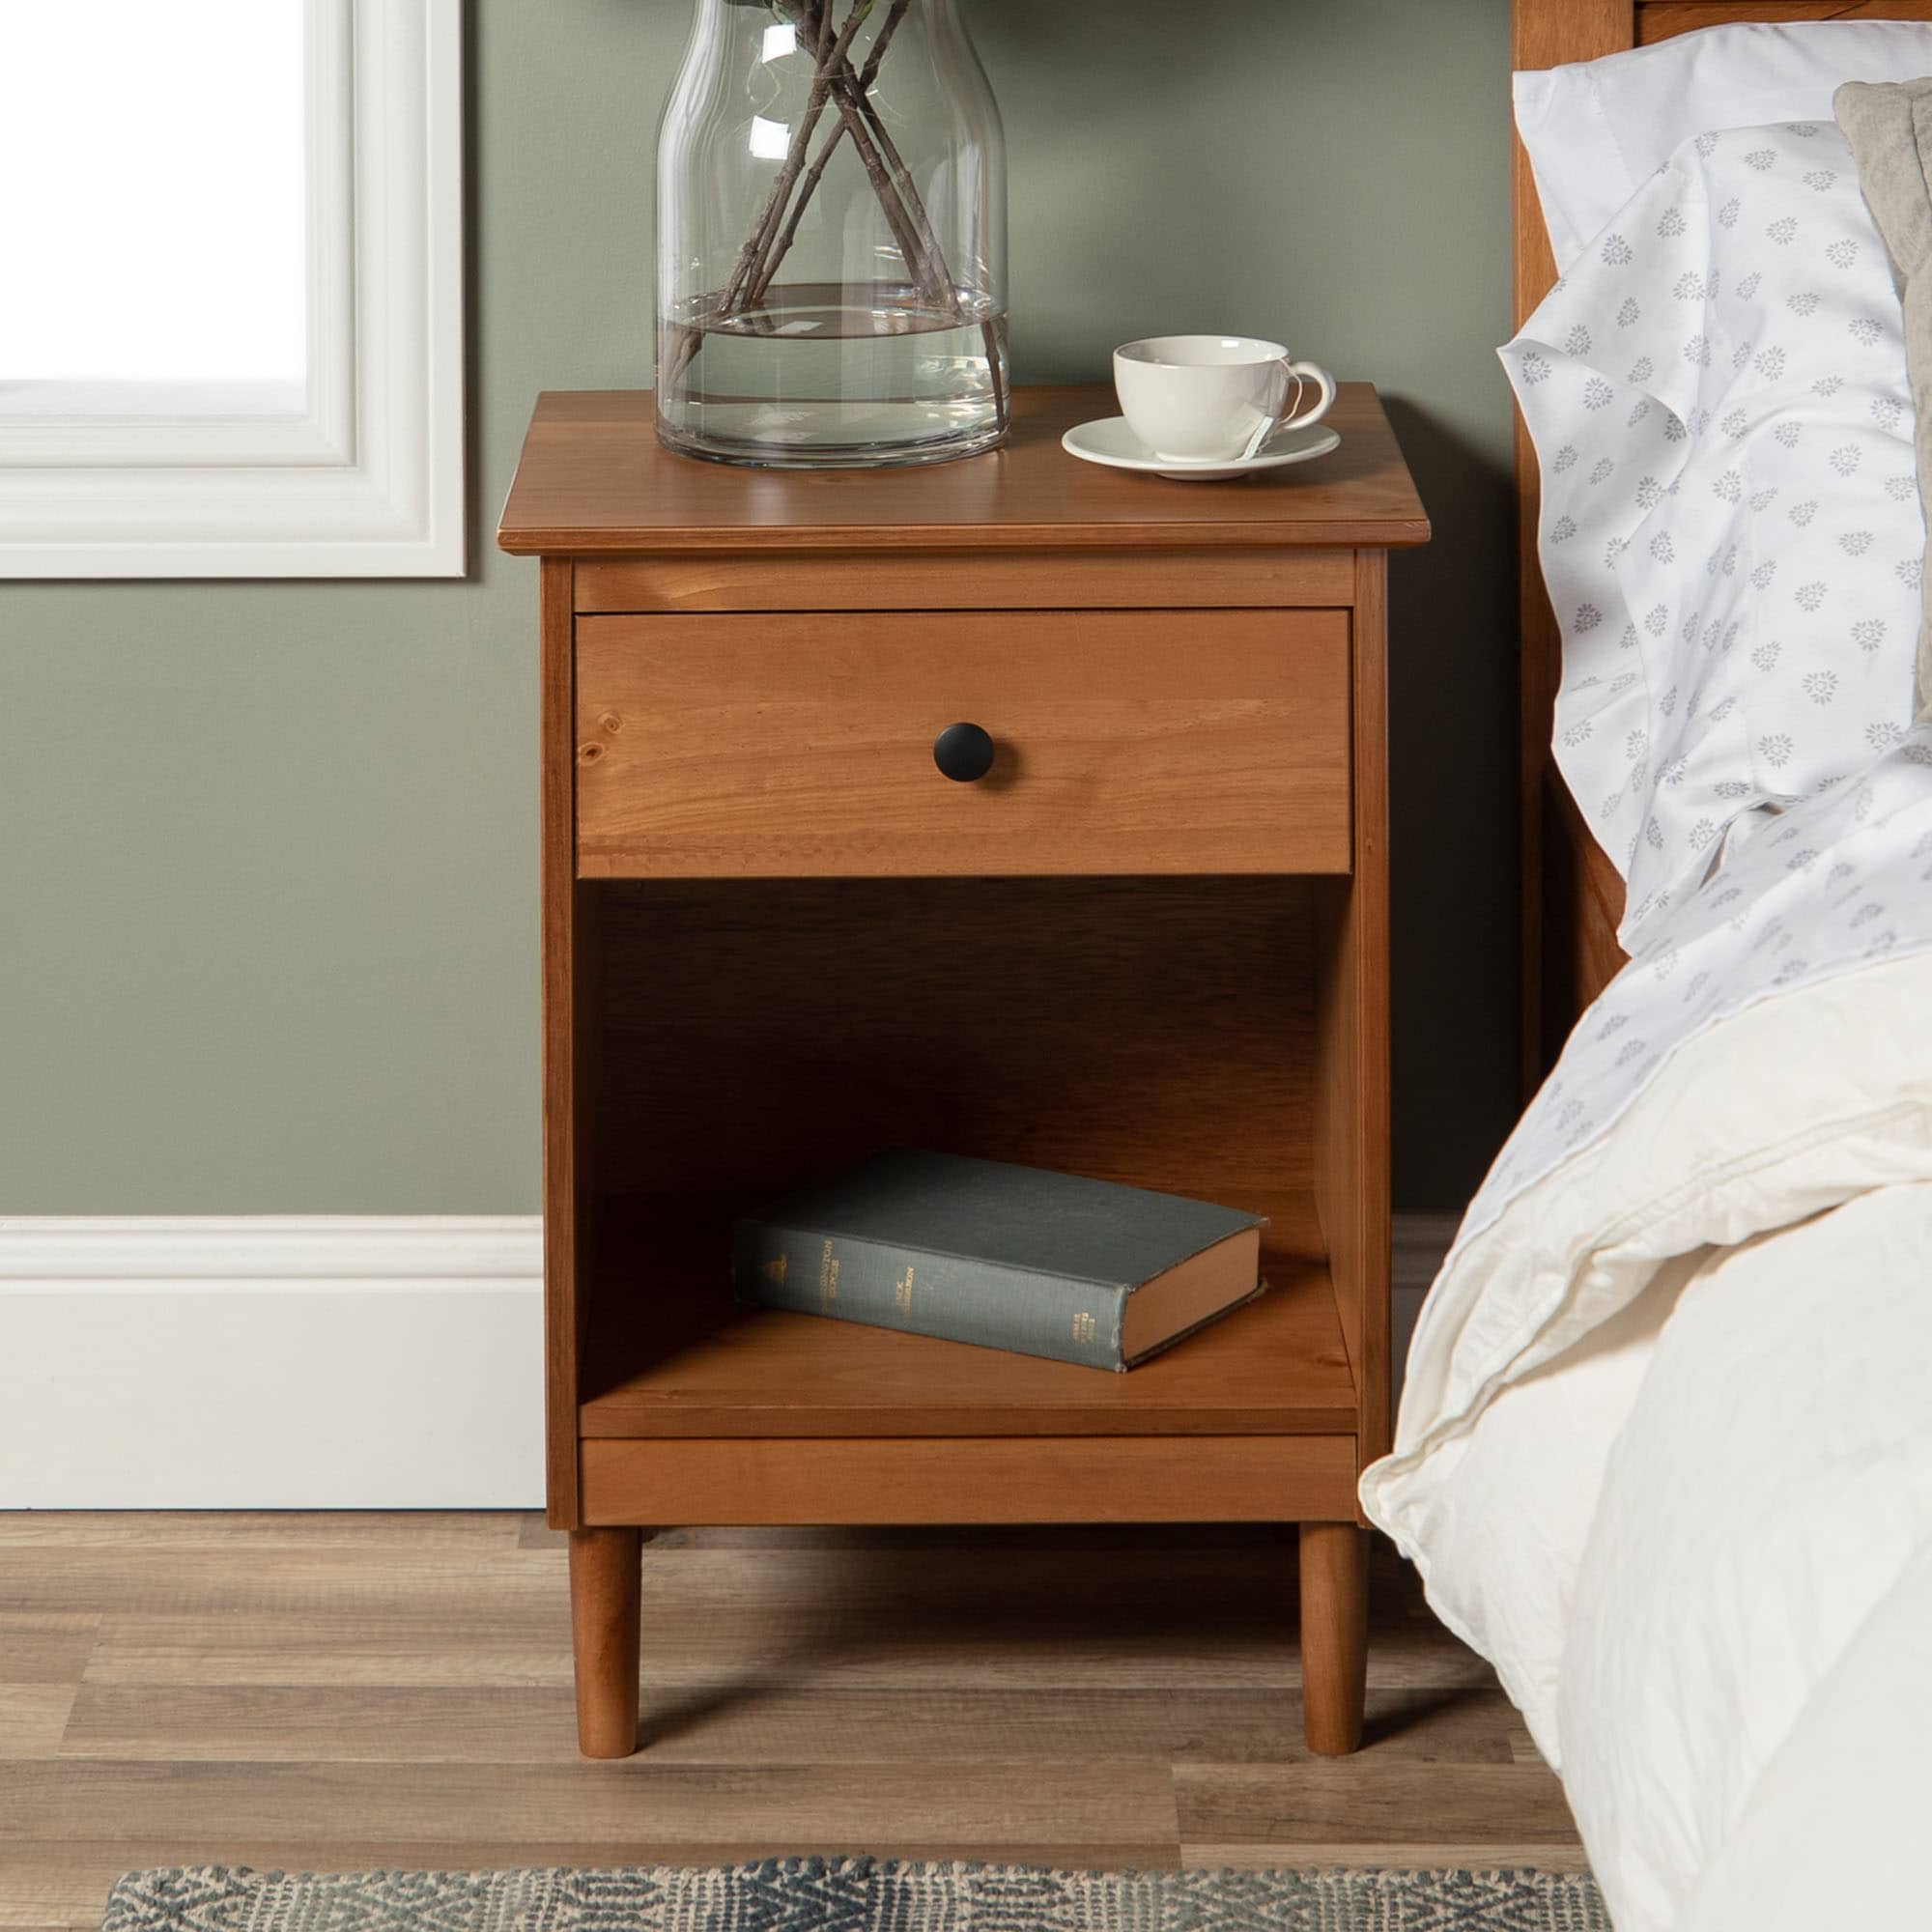 Prepac Transitional Espresso Nightstand with 2 Drawers - Sturdy  Construction, Antique Bronze Knobs, Dark Brown Finish in the Nightstands  department at